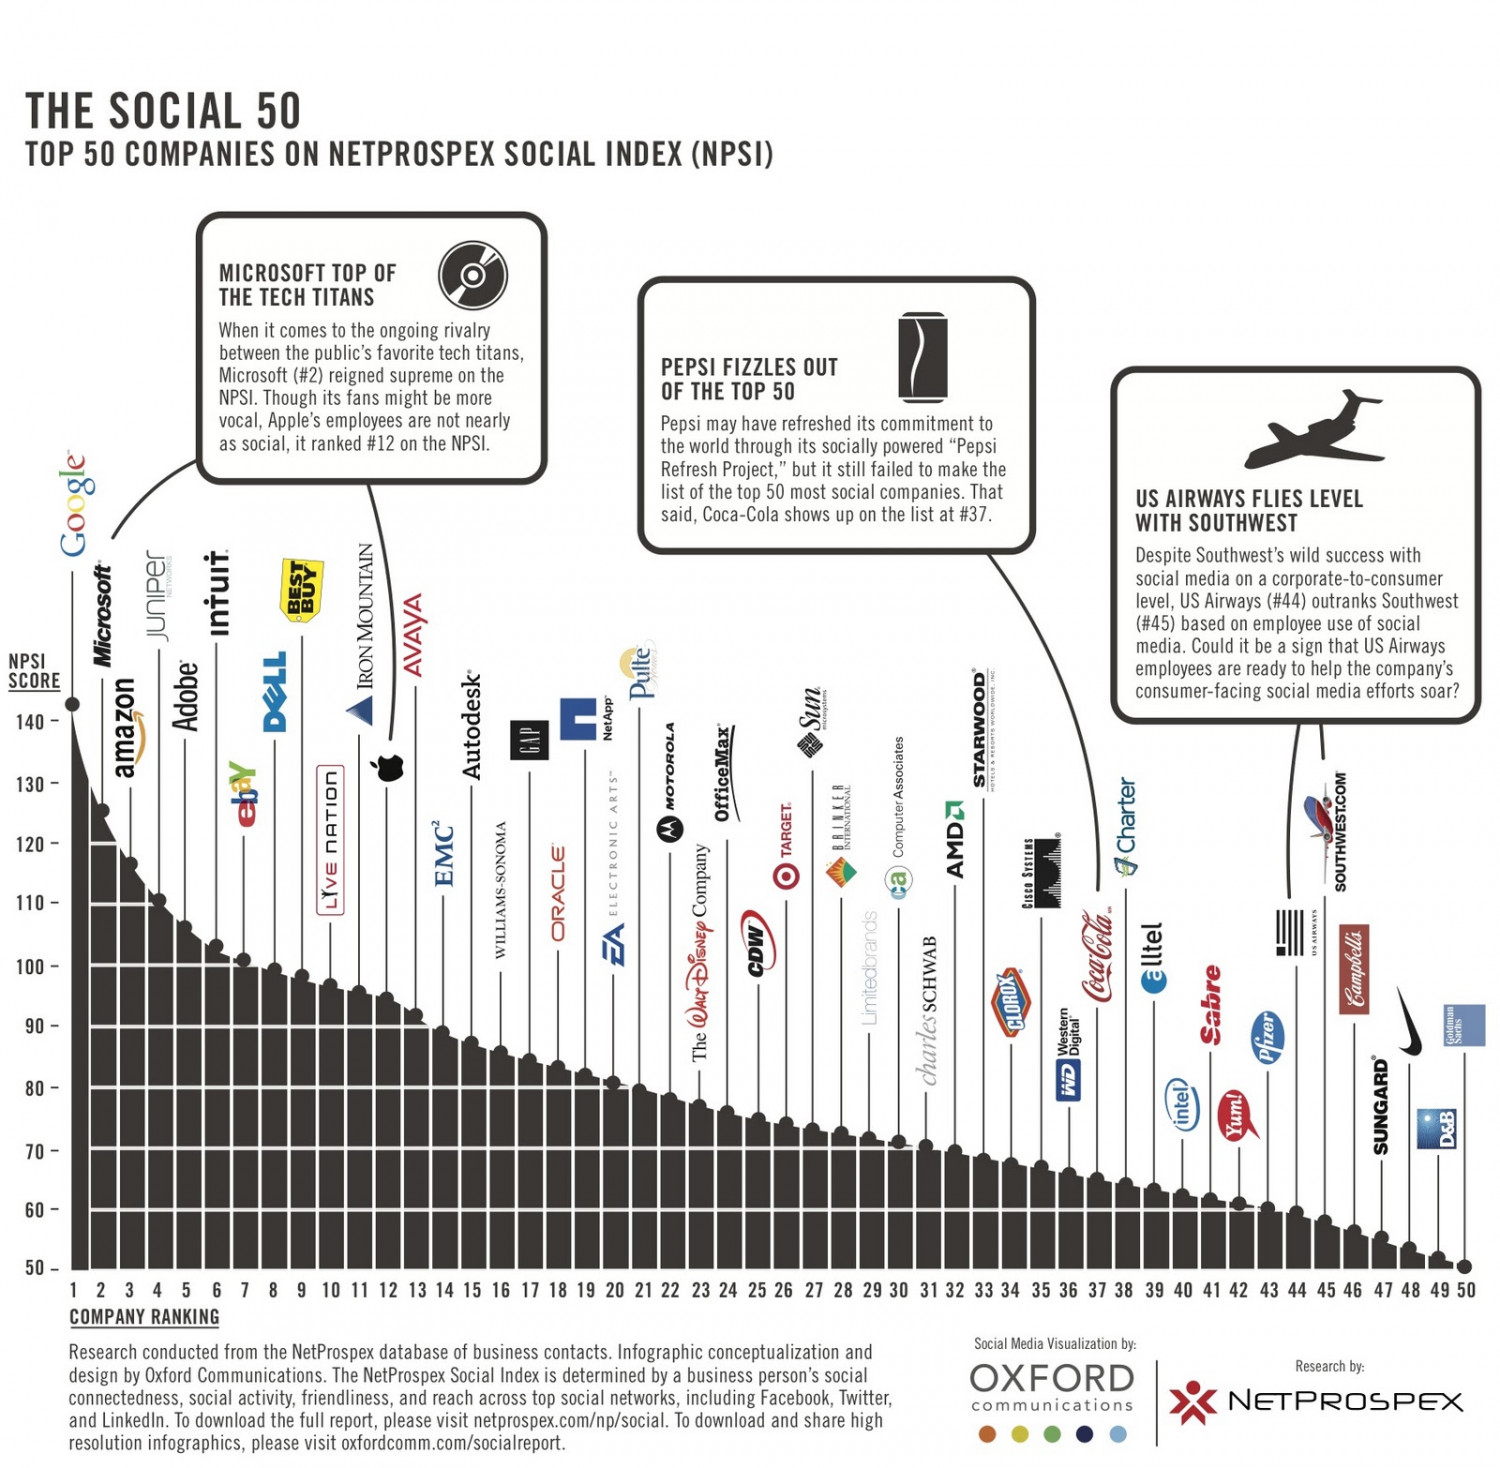 The Social 50: Top 50 Companies on the NetProspex Social Index (NPSI) Infographic